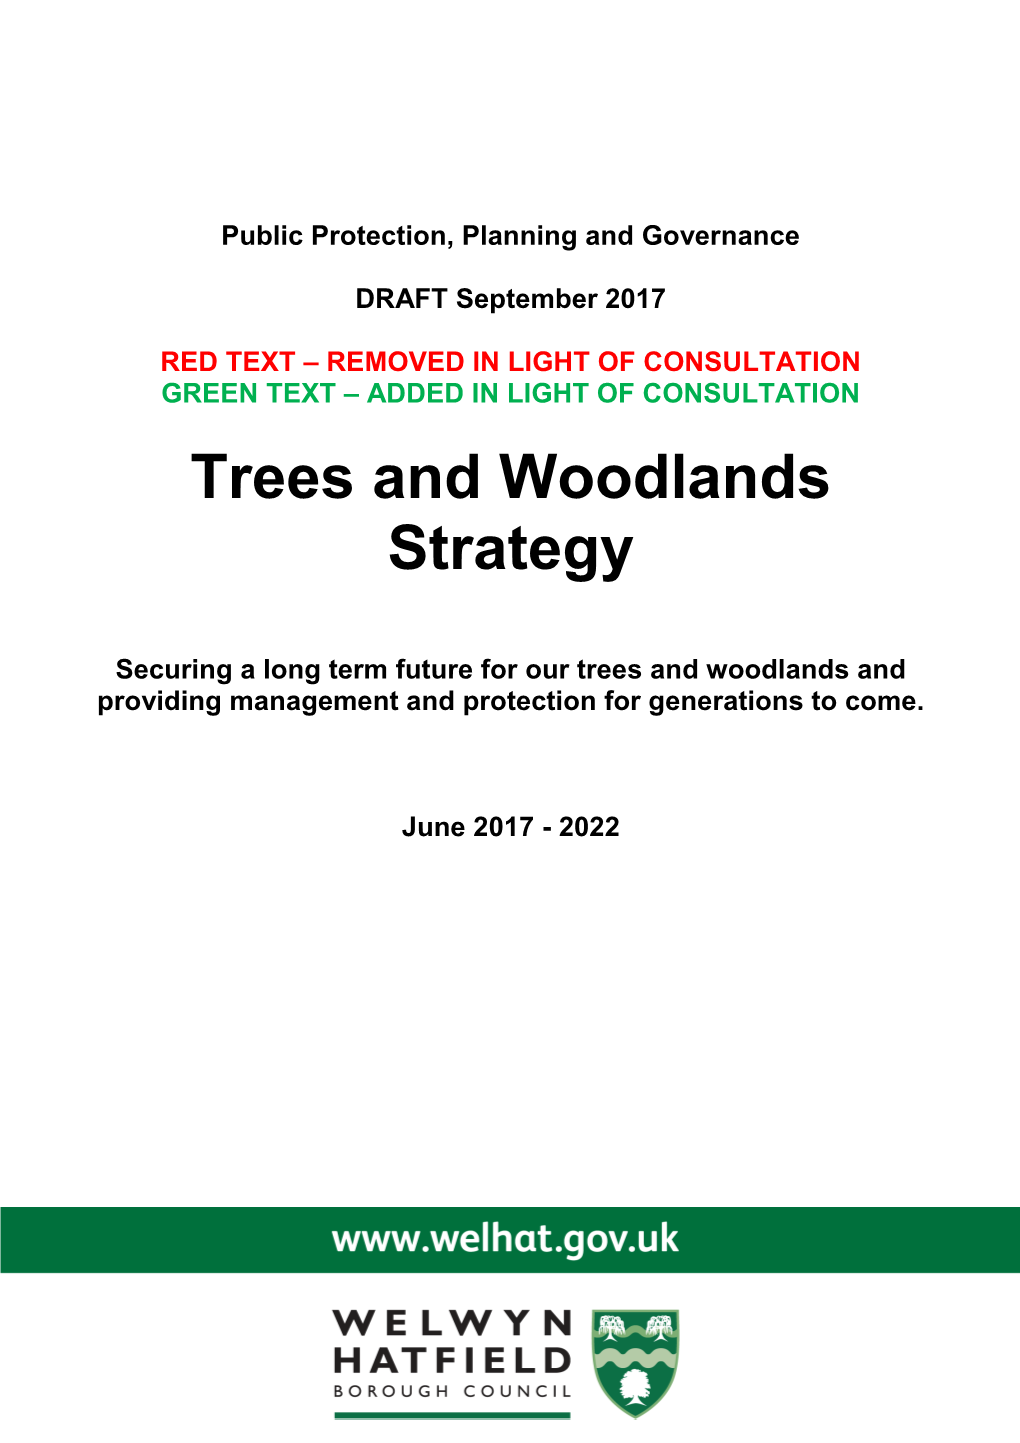 Trees and Woodlands Strategy